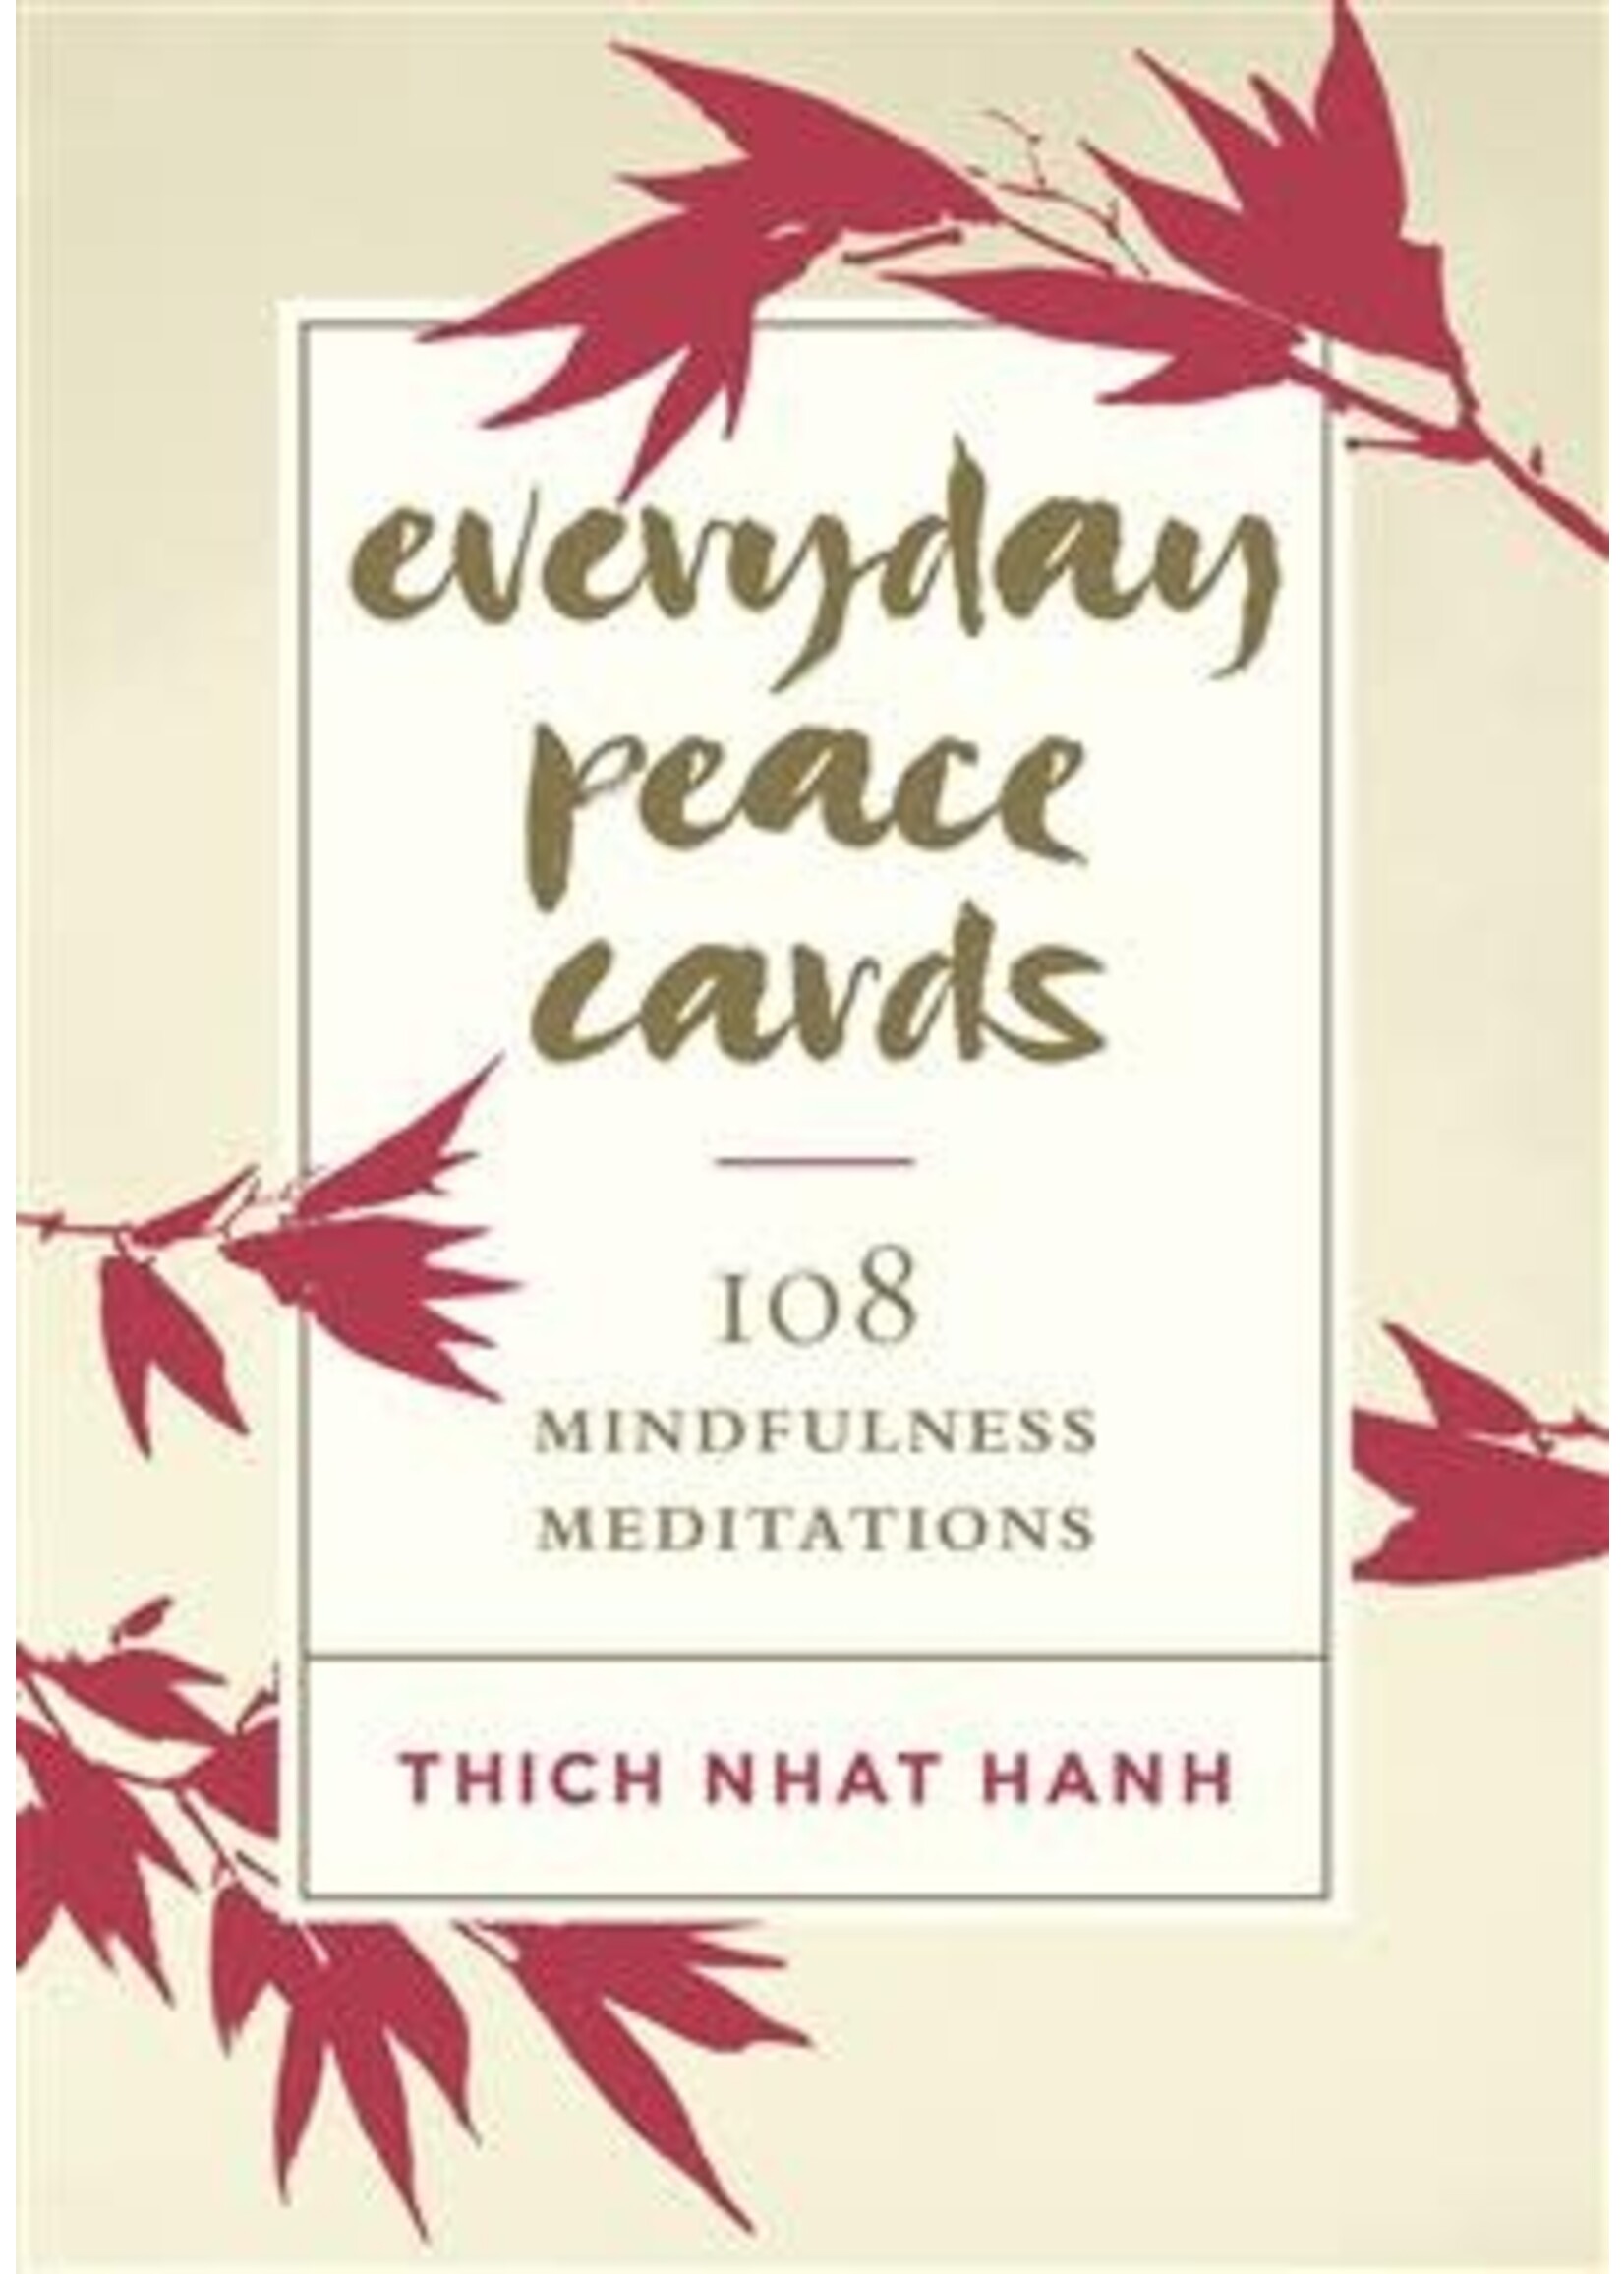 Everyday Peace Cards: 108 Mindfulness Meditations by Thich Nhat Hanh